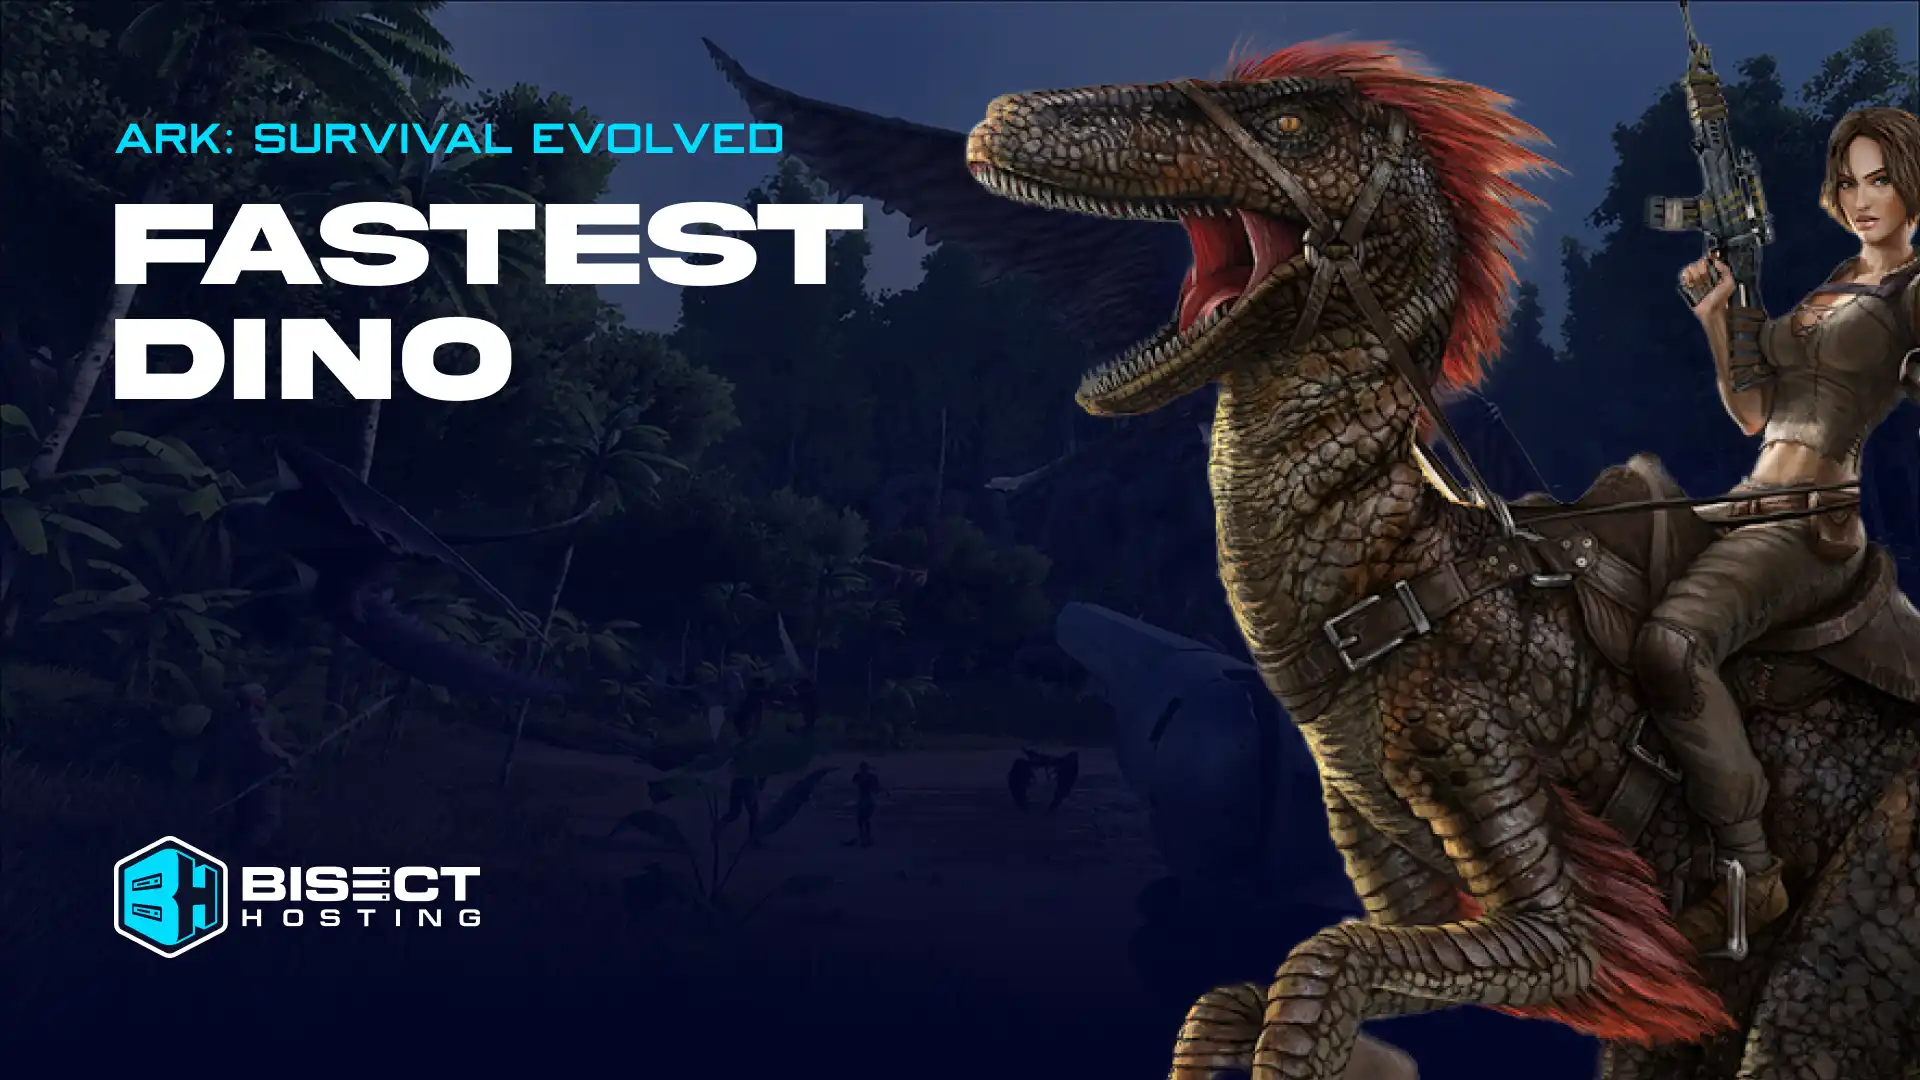 What are the Fastest Dinos in ARK: Survival Evolved?